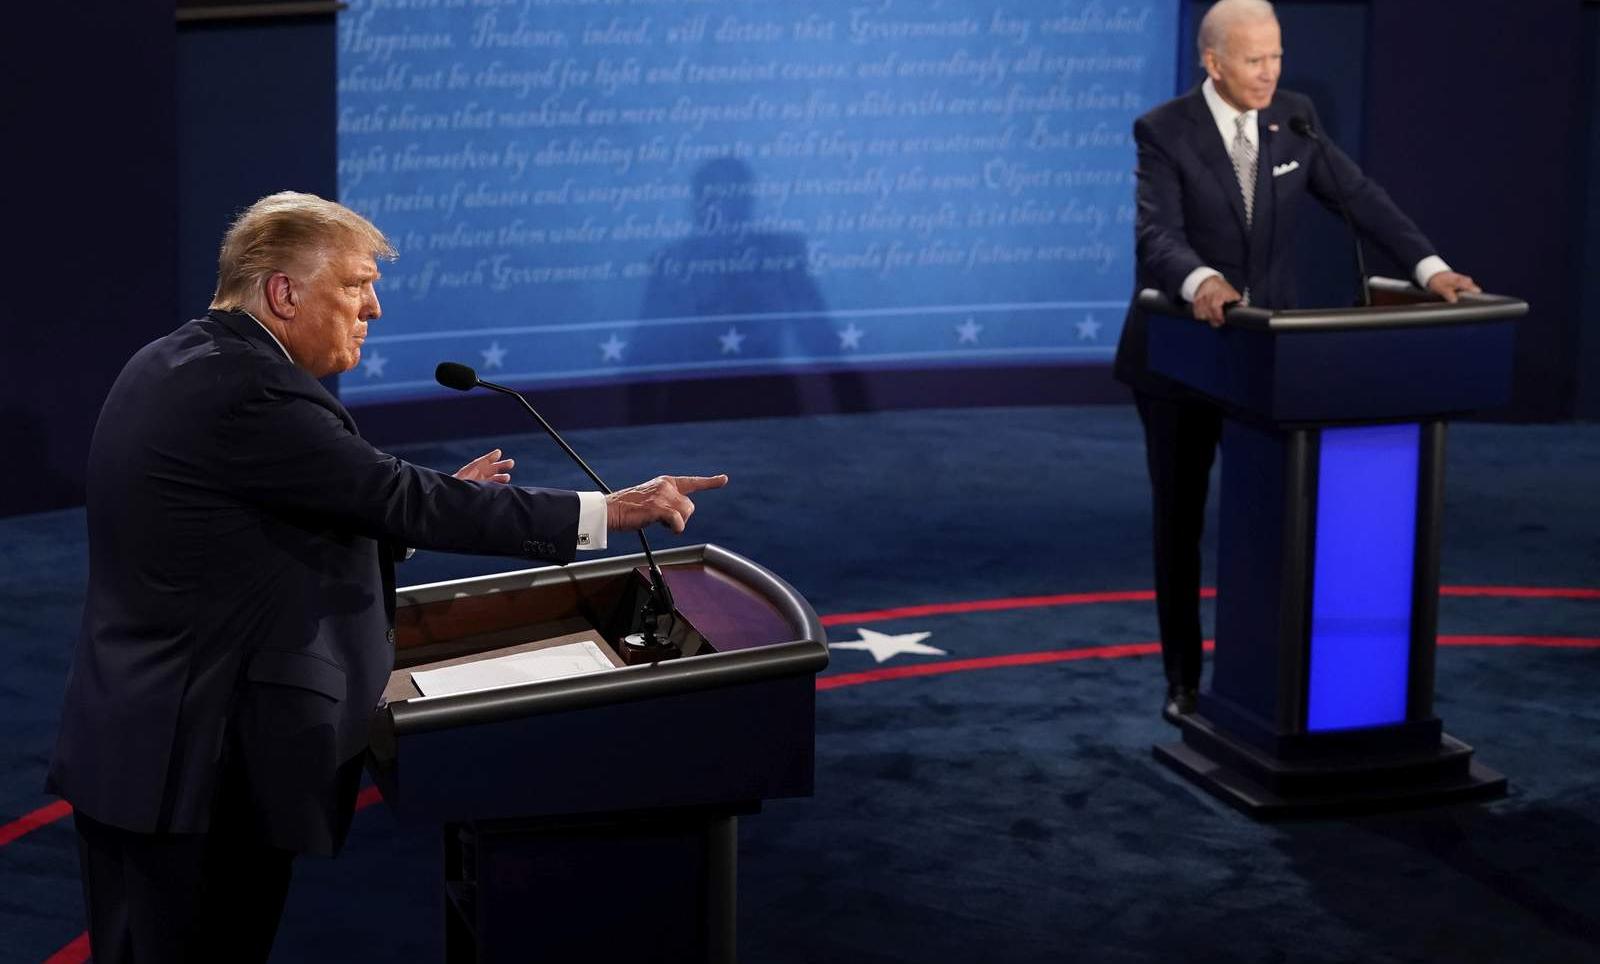 donald-trump-insists-on-next-presidential-debate-being-in-person-even